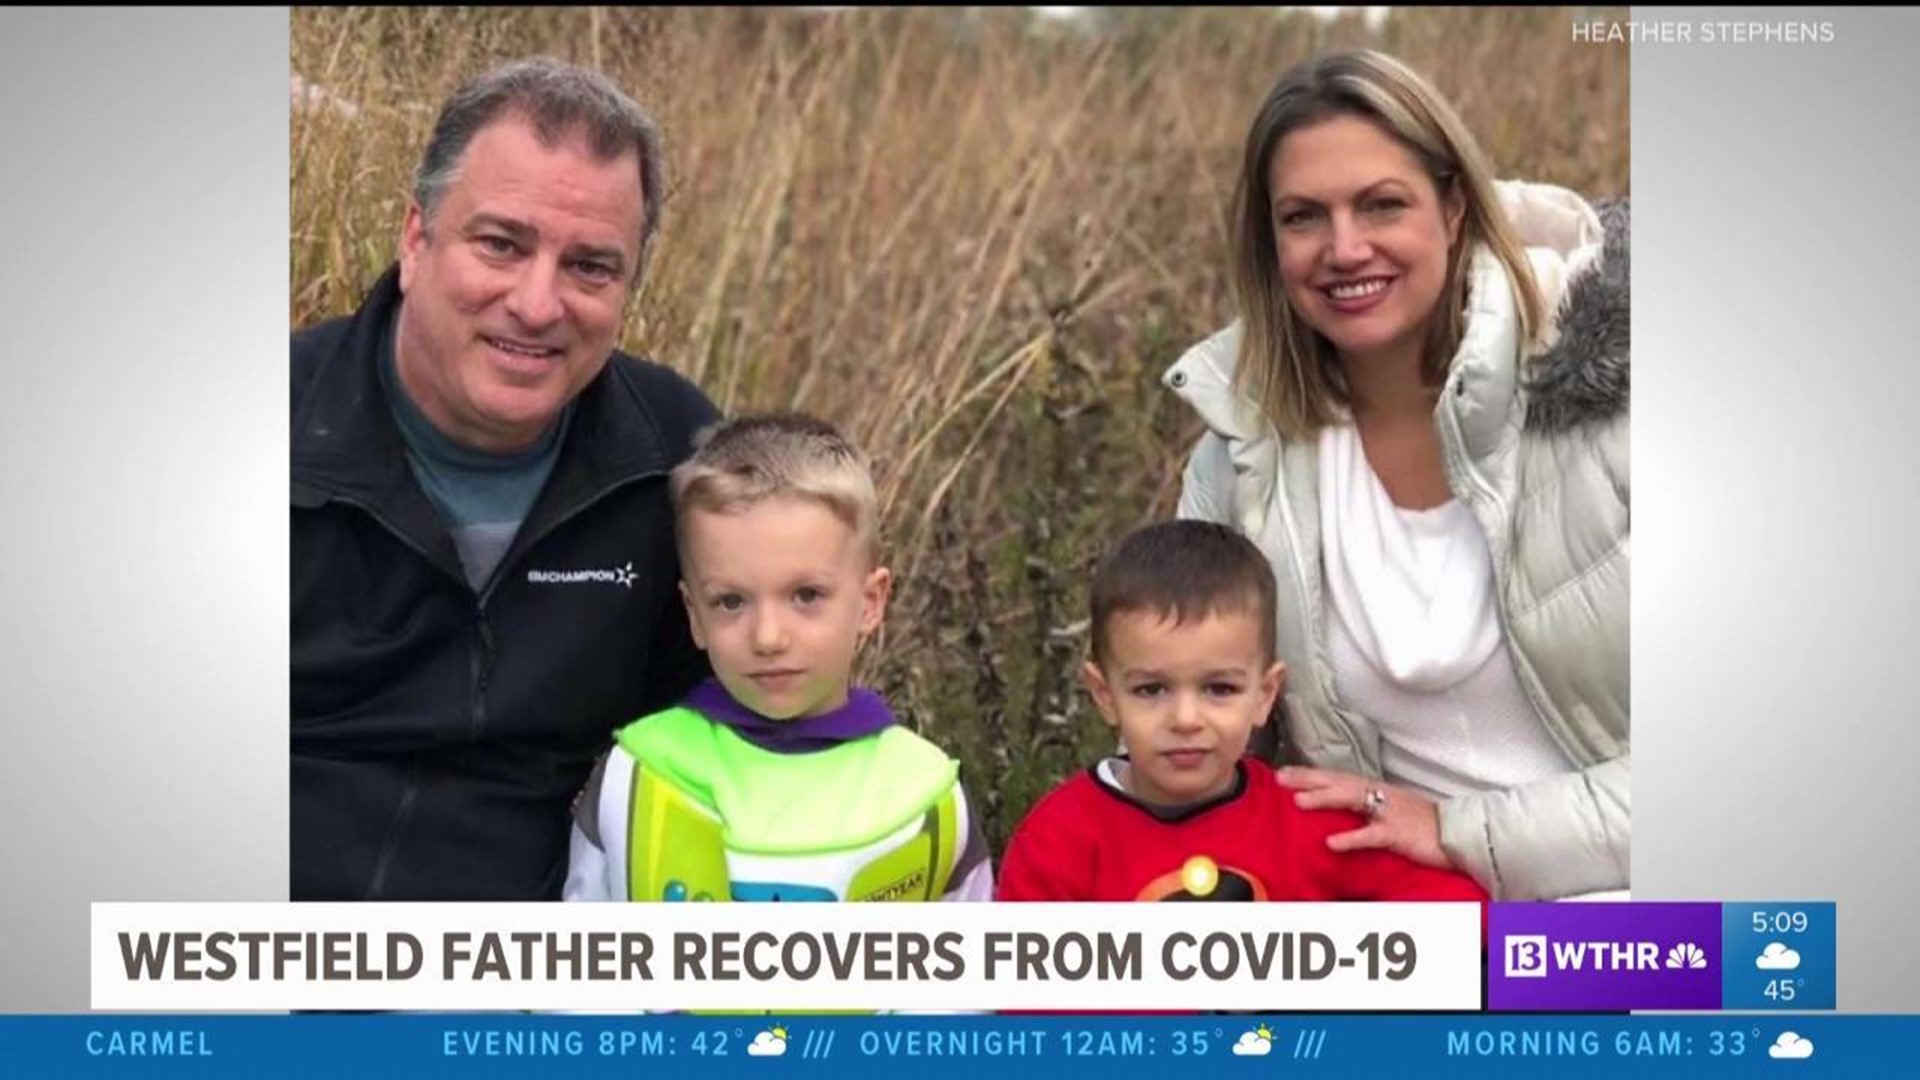 Westfield father recovers from COVID-19